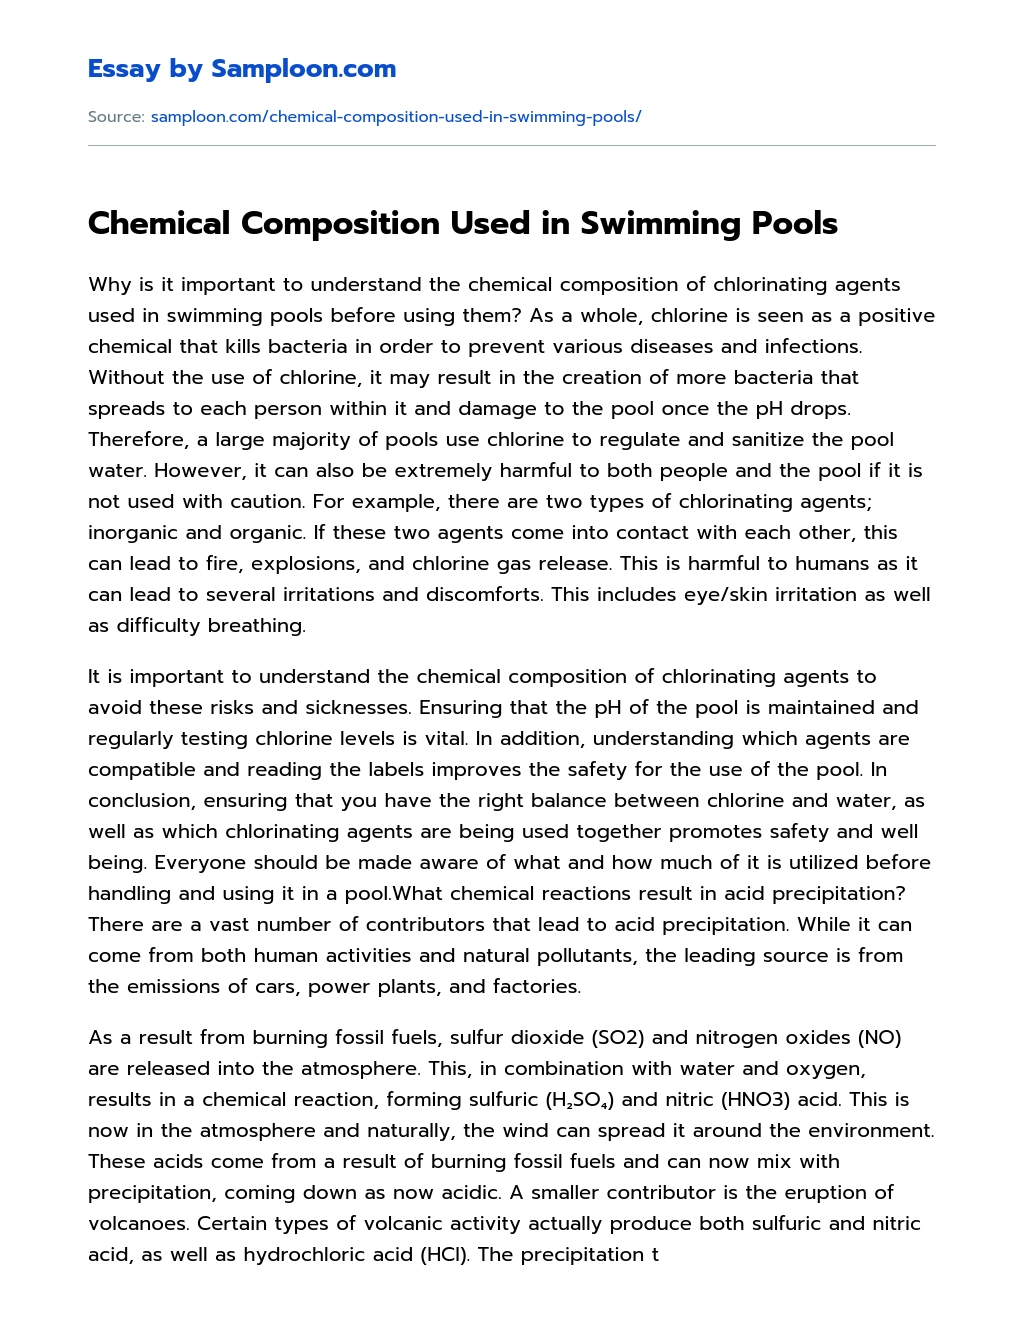 Chemical Composition Used in Swimming Pools essay